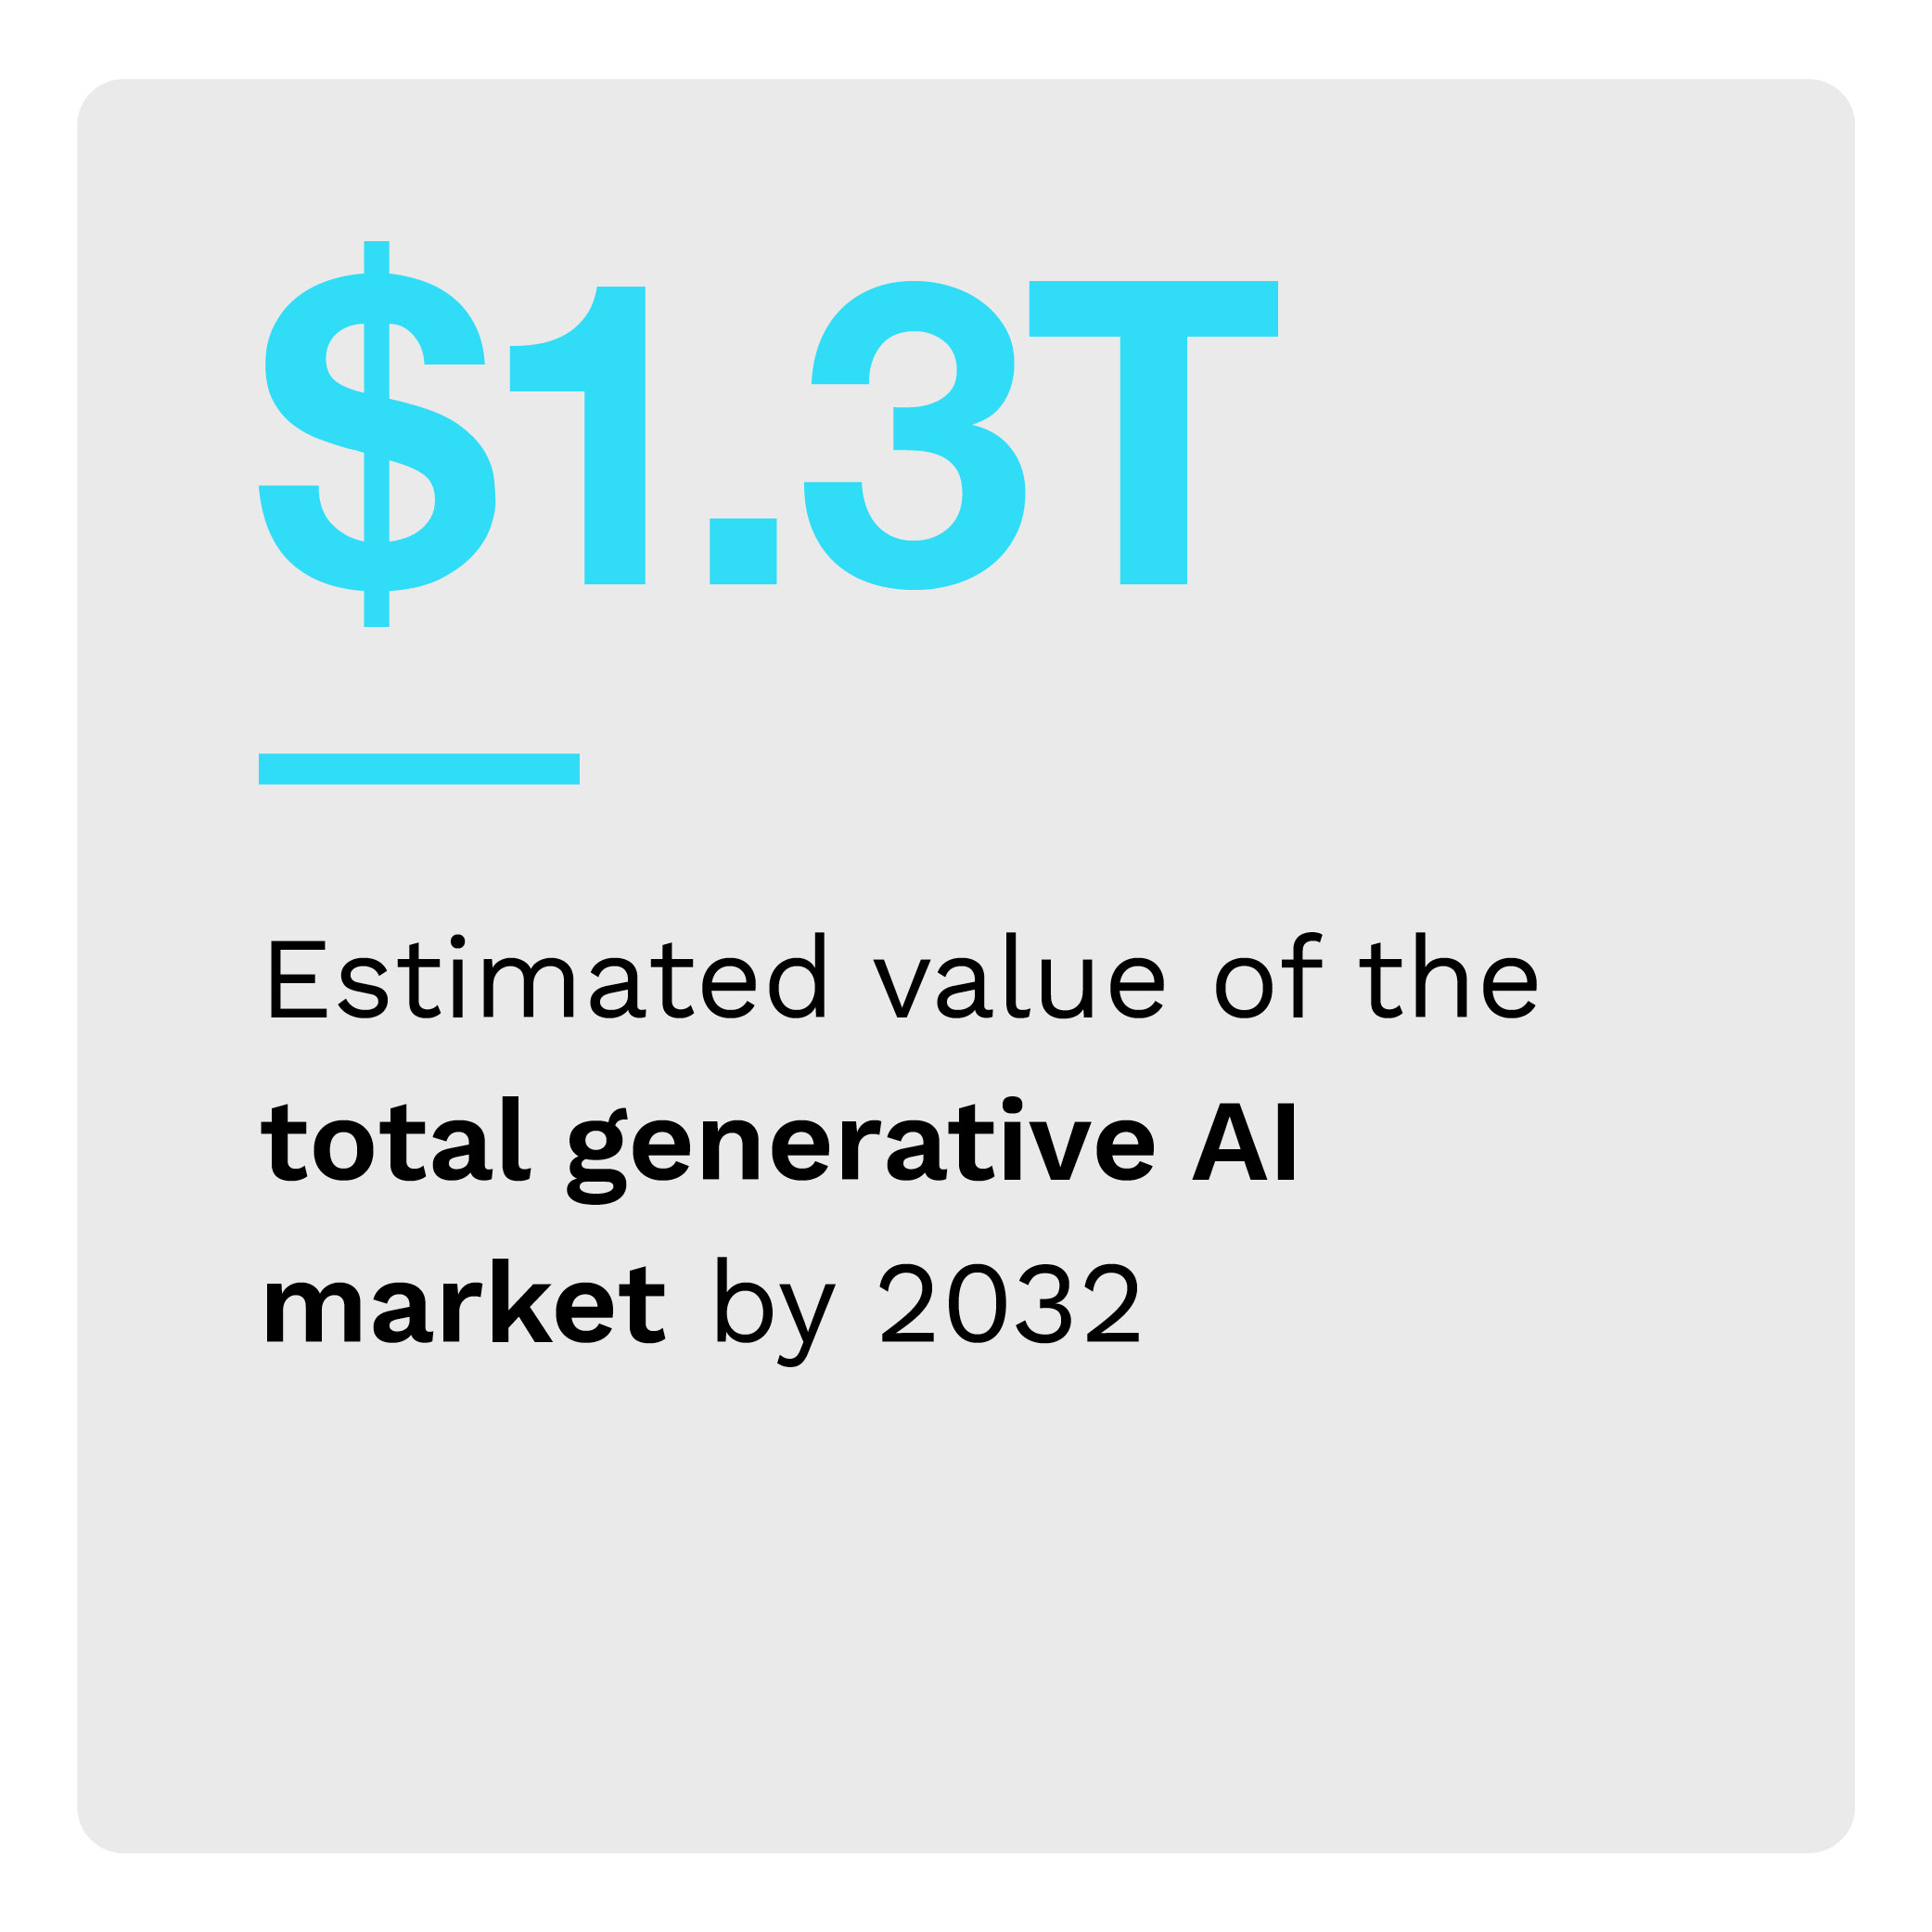 $1.3T: Estimated value of the total generative AI market by 2032